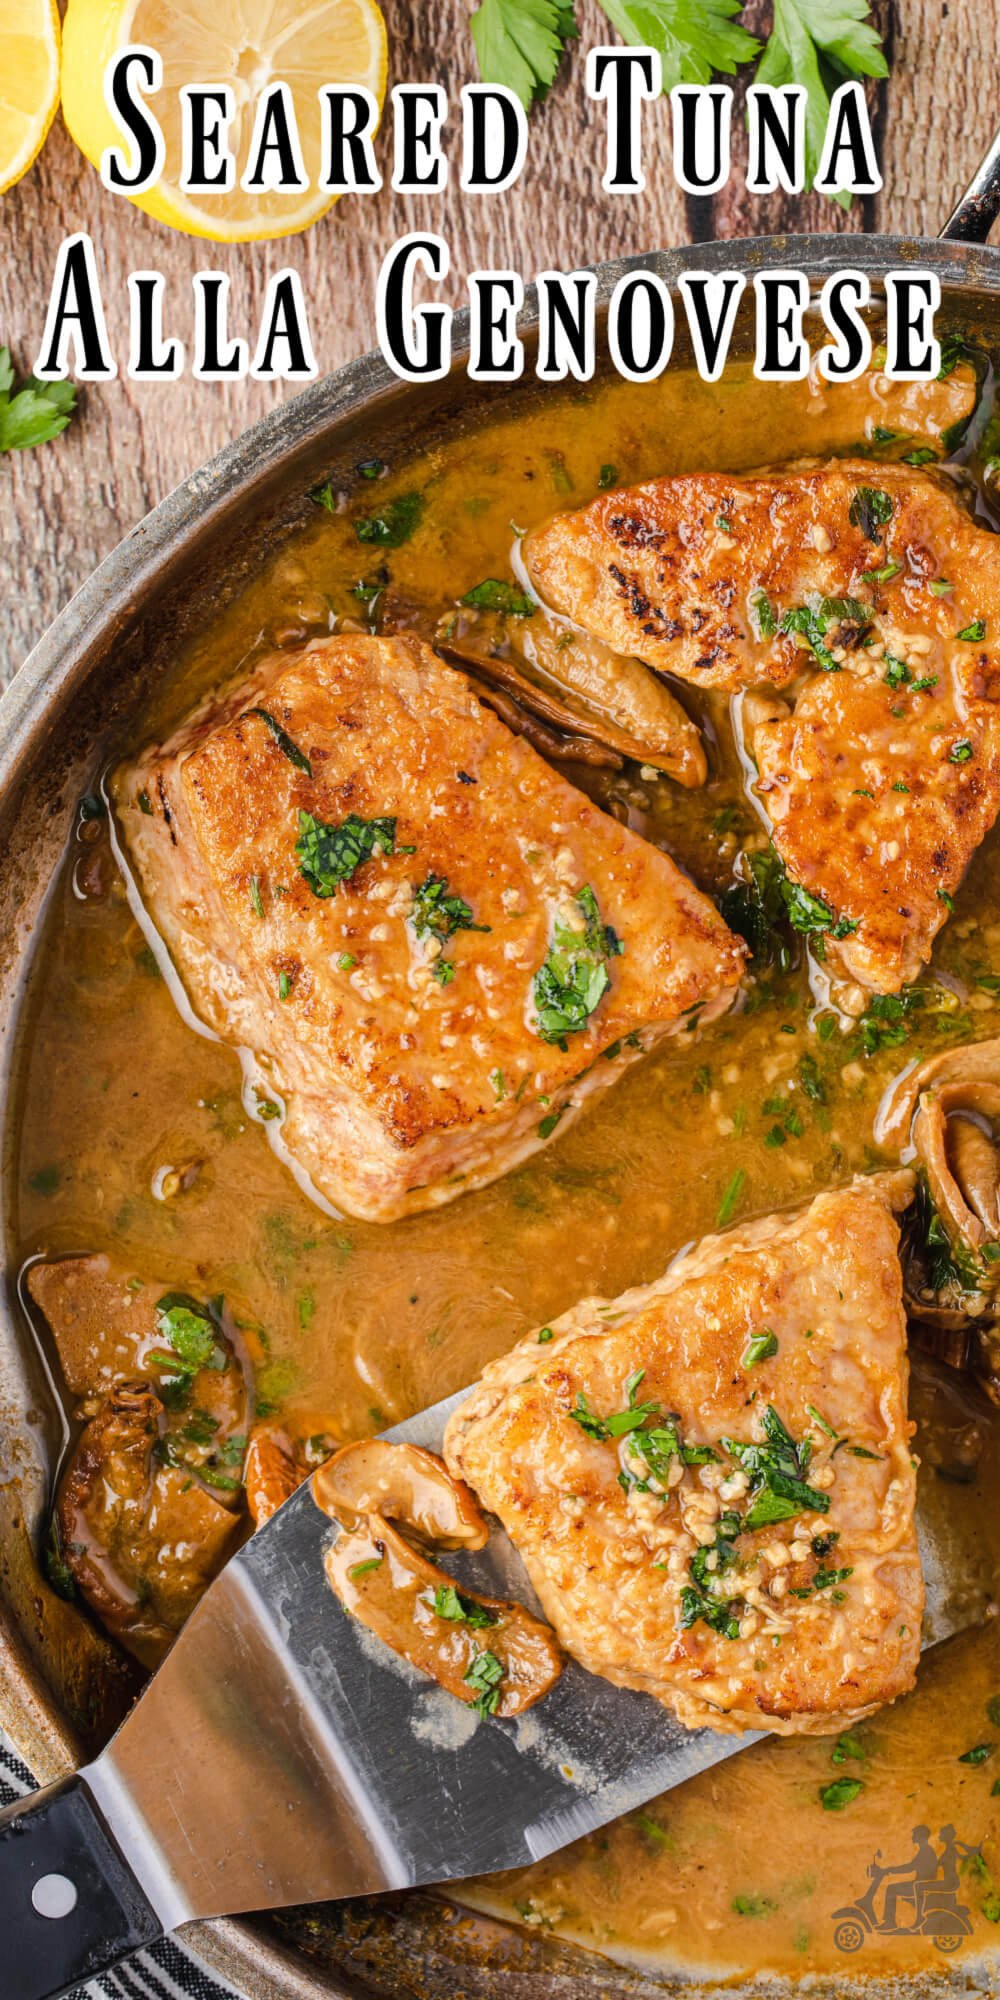 Yellowfin Tuna Steaks Recipe is a quick and easy one skillet meal that first browns the tuna, then the porcini wine sauce is made separately and combined with the seafood before serving. Serve it with pasta, by itself, or polenta. #tuna, #tunasteaks, #tunaallagenovese, #onepanmeal, #quickeasytuna.